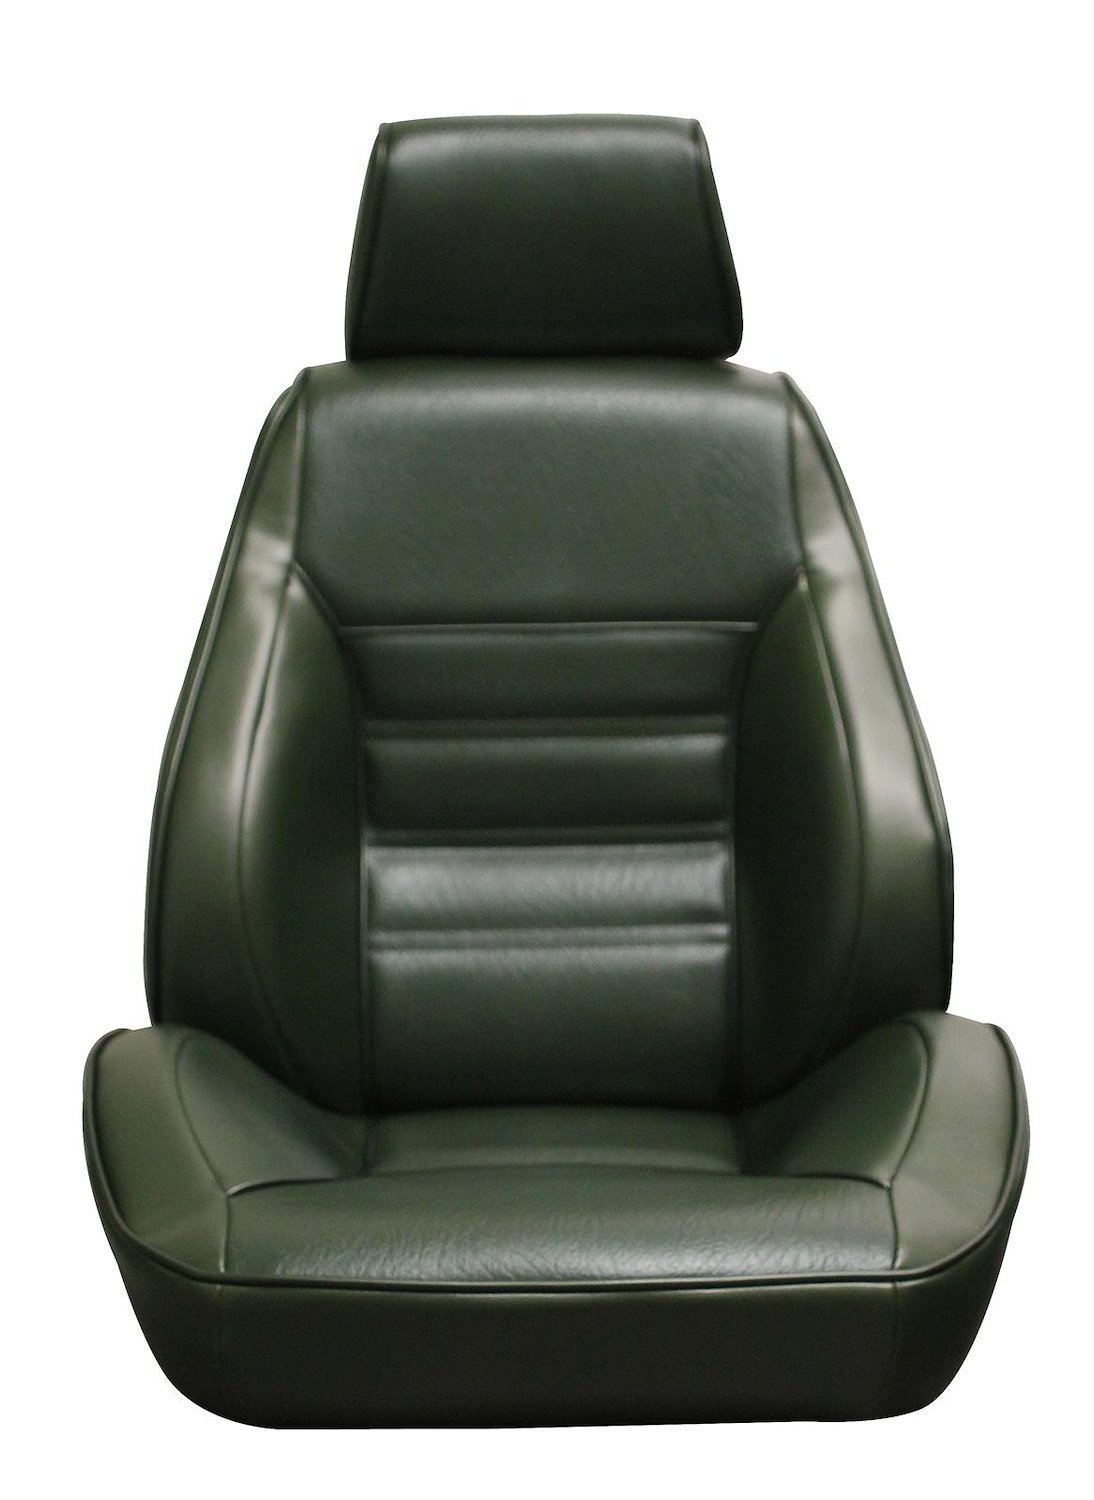 1971-1973 Ford Mustang Standard Interior Blue Touring II Preassembled Reclining Front Bucket Seats